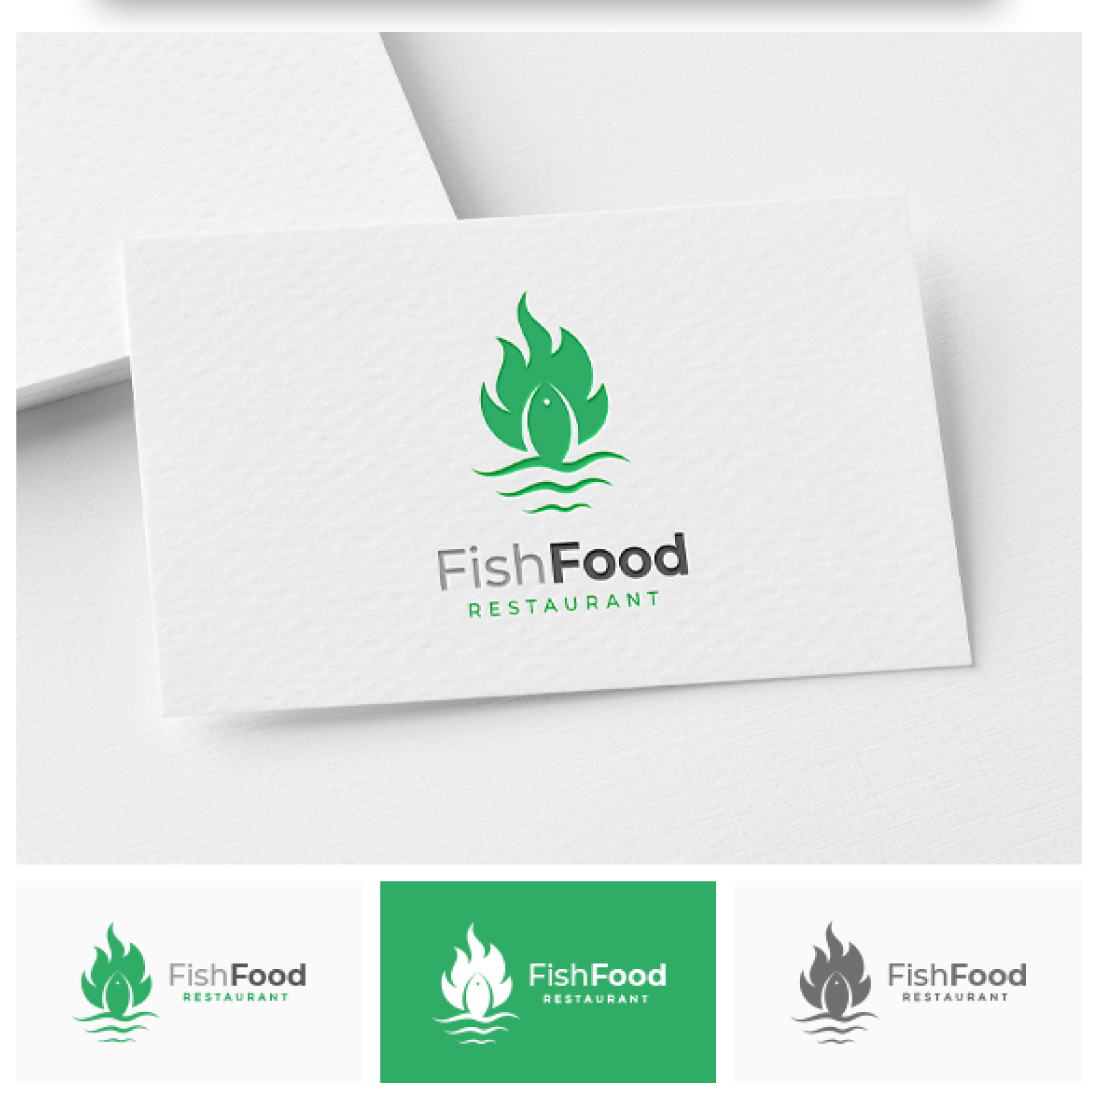 Logo for a restaurant called fish food.